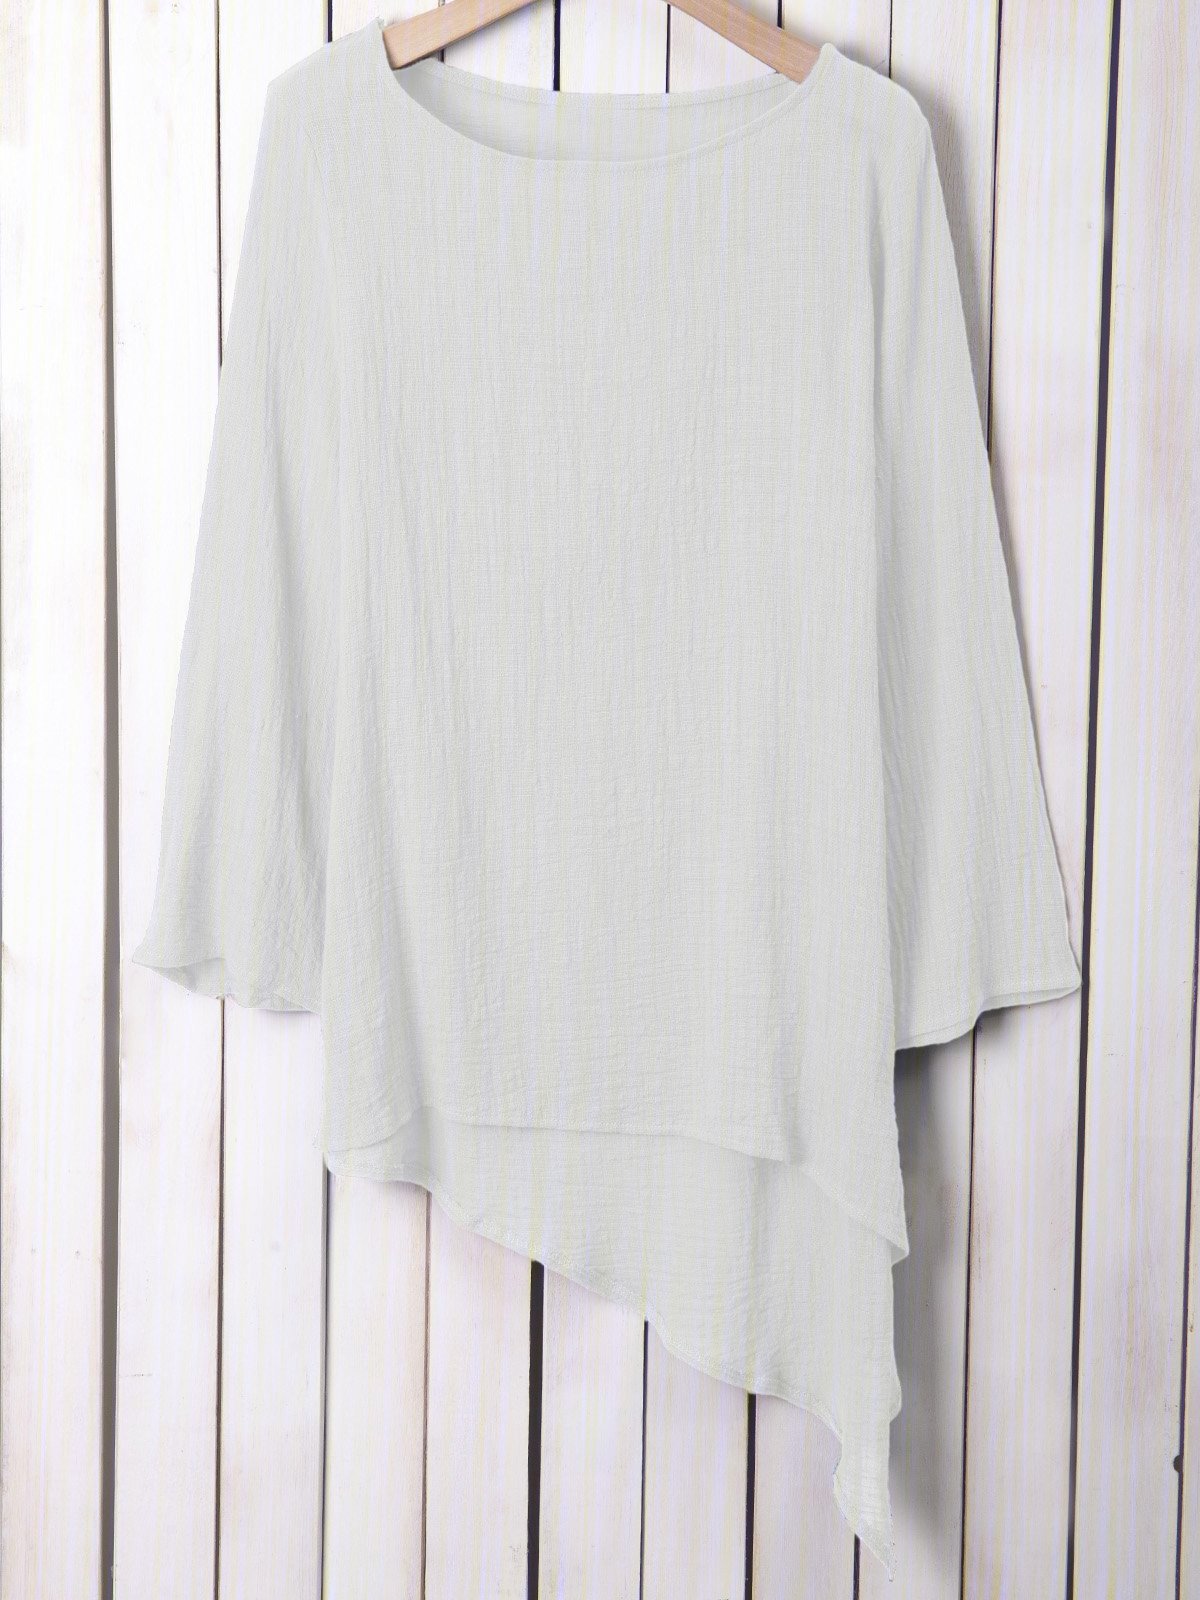 Solid Long Sleeve Casual Asymmetric Causal Tops